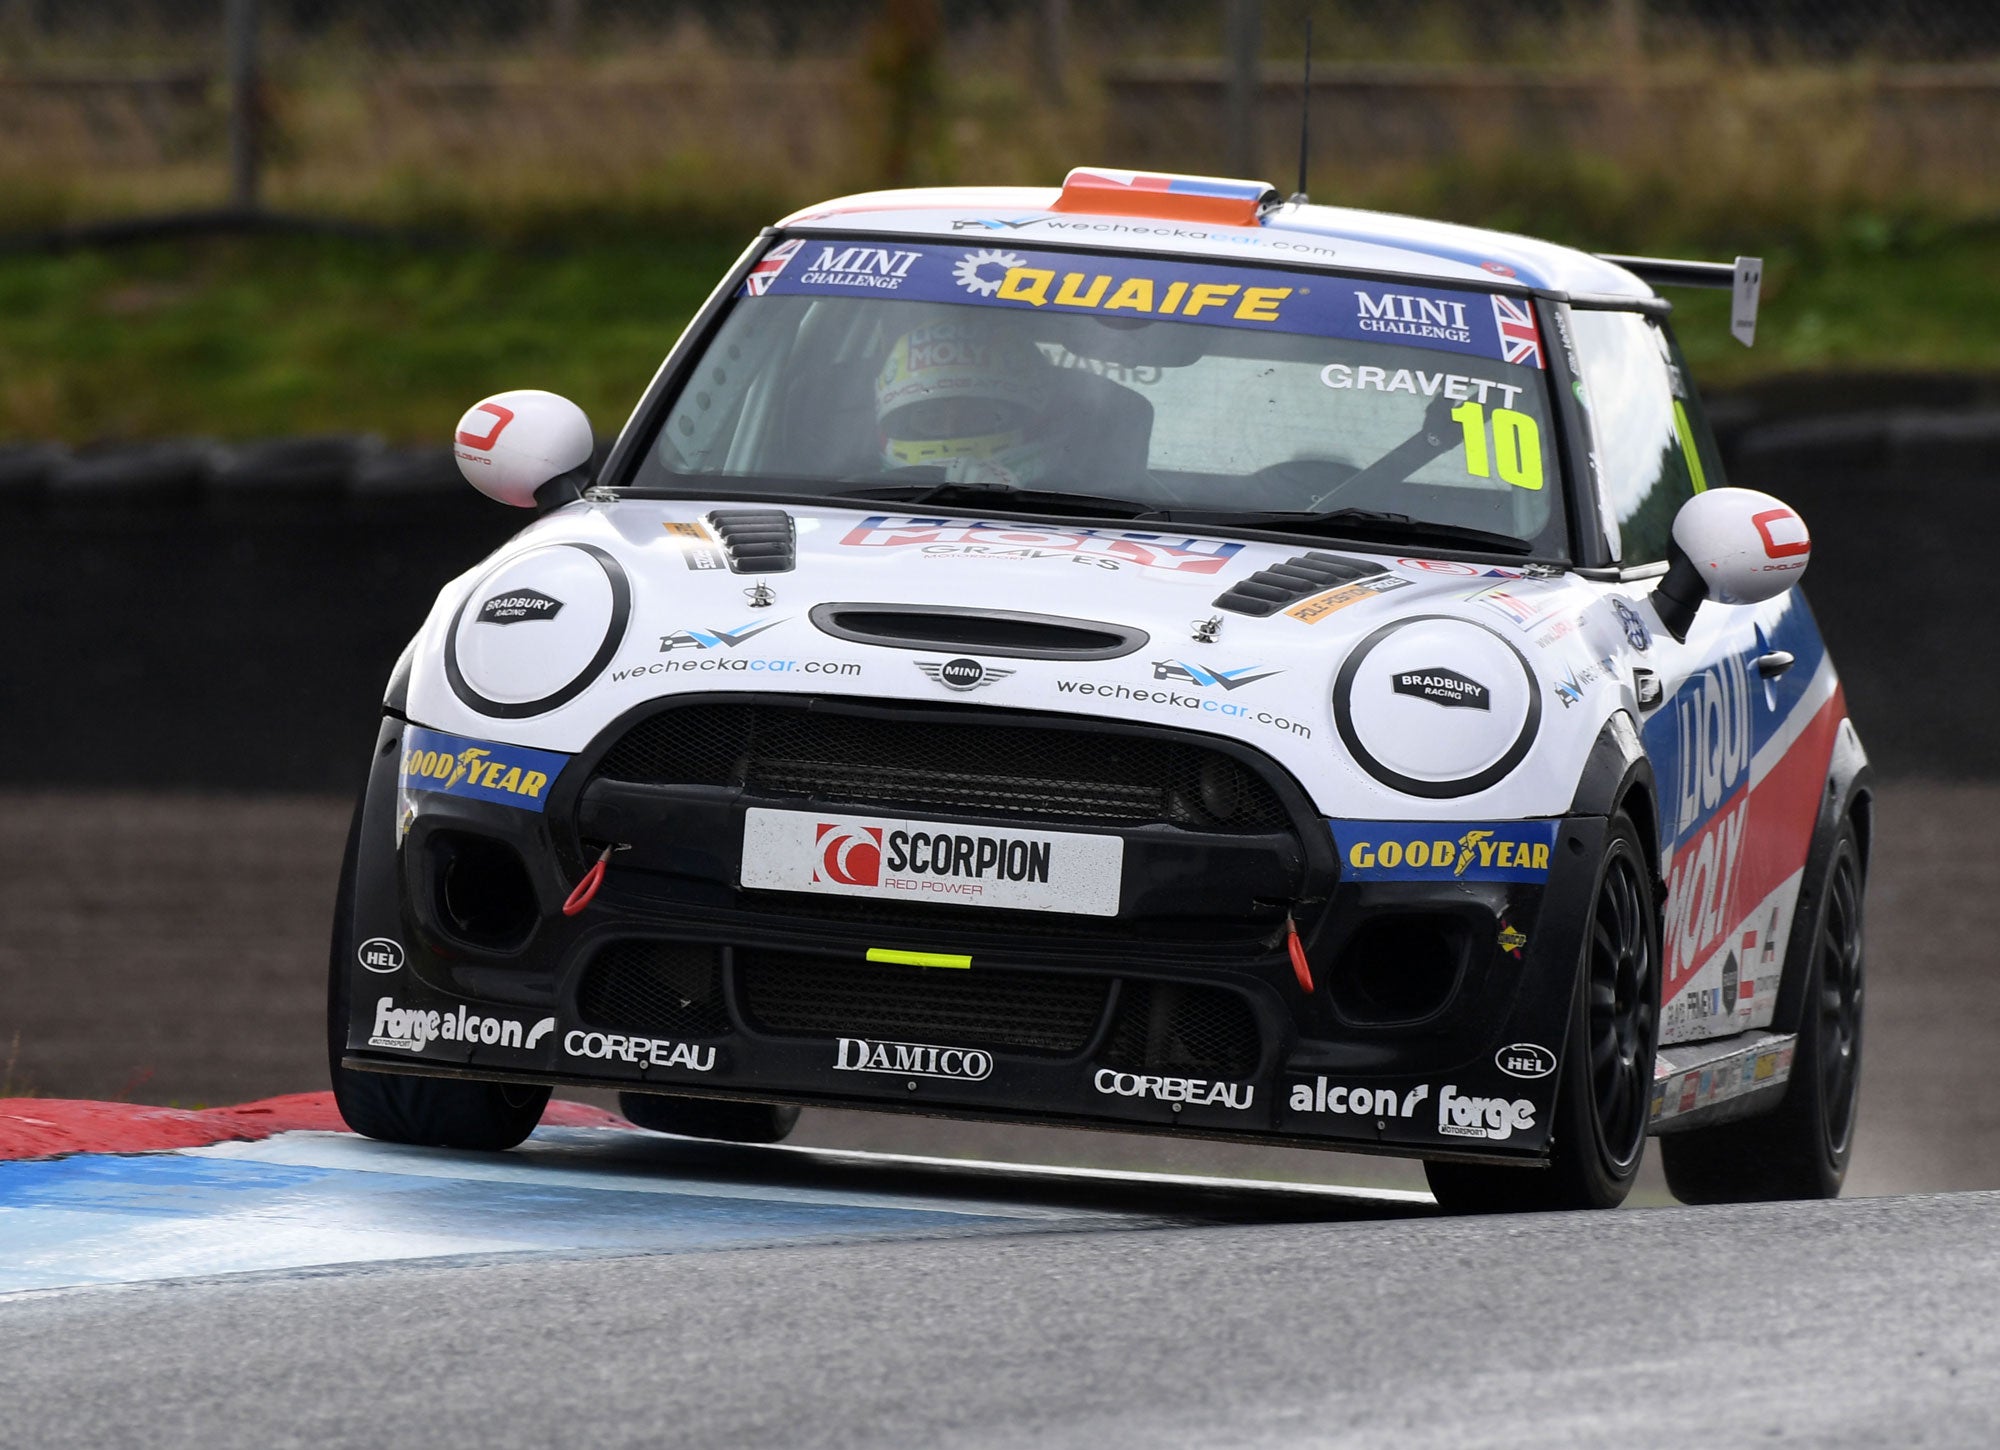 Bradley Gravett son of BTCC British Touring Car Champion Robb Gravett in the MINI Challenge JCW Series at Knockhill in 2021 Turn 6 on the Curb Graves Motorsport Cooper Racing Driver LIQUI MOLY LM Performance Thinking it Better